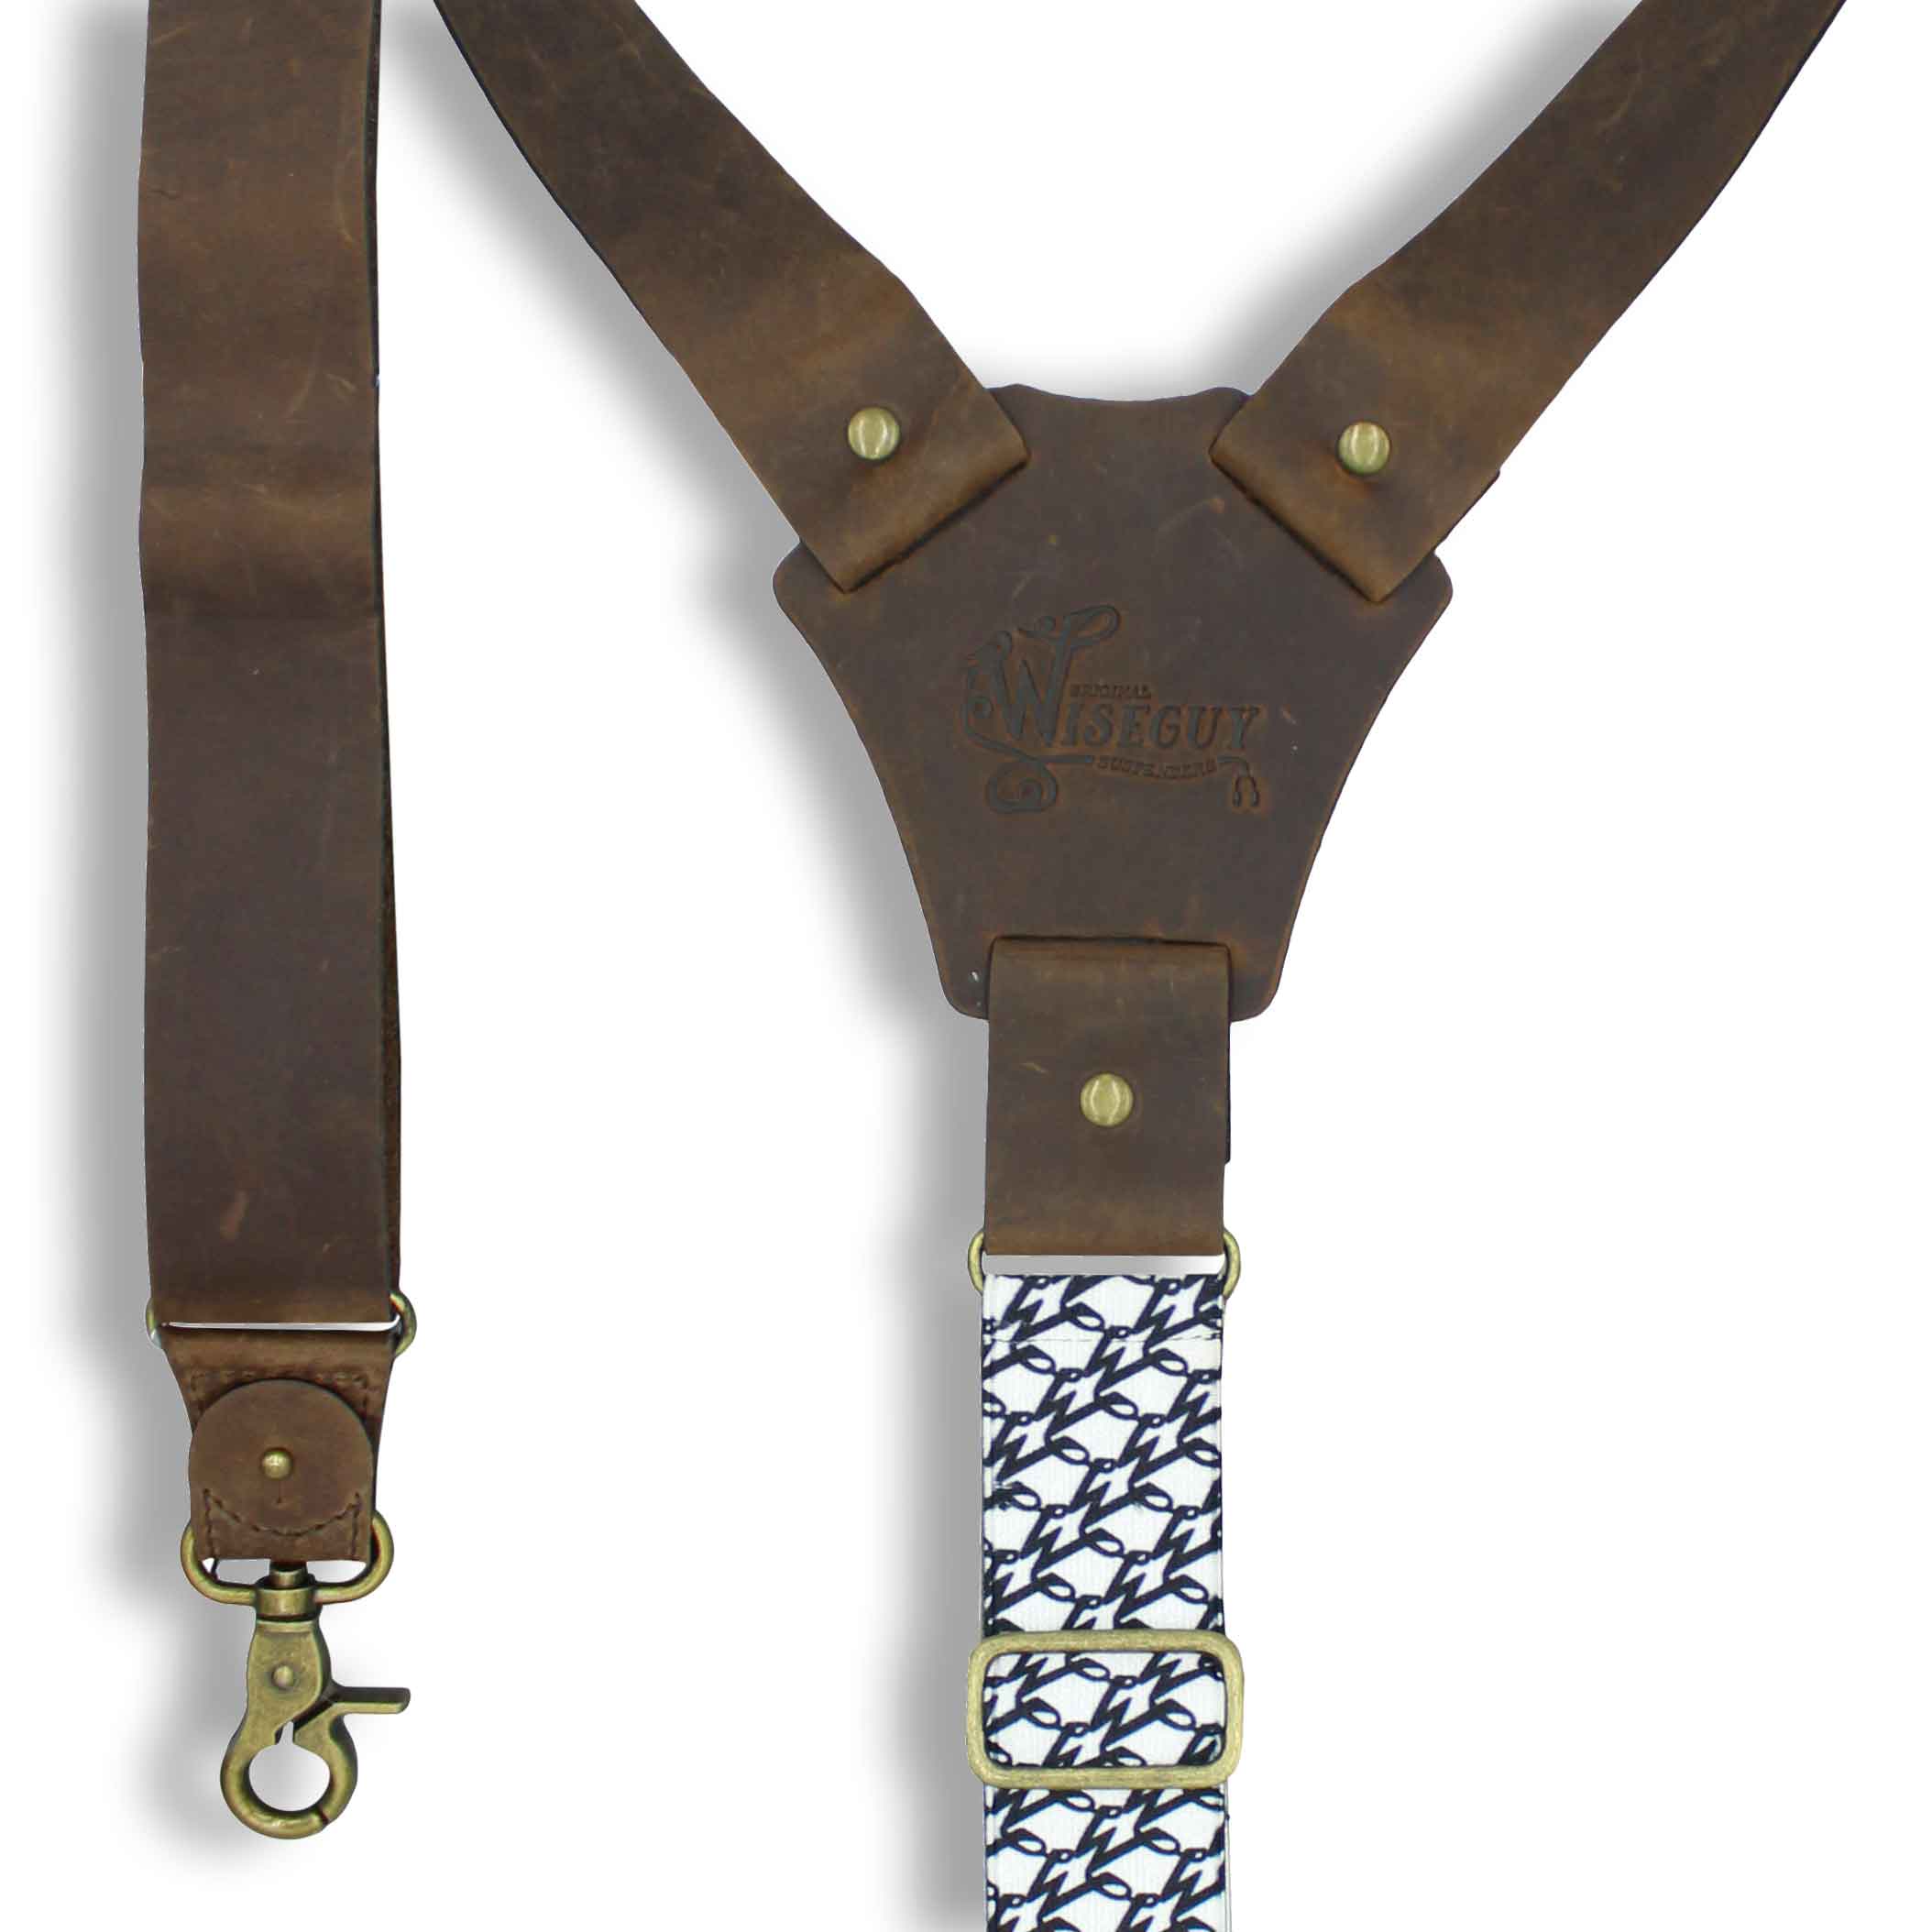 Billy the Kid Flex Brown Leather Suspenders with Elastic W Back Strap - Wiseguy Suspenders